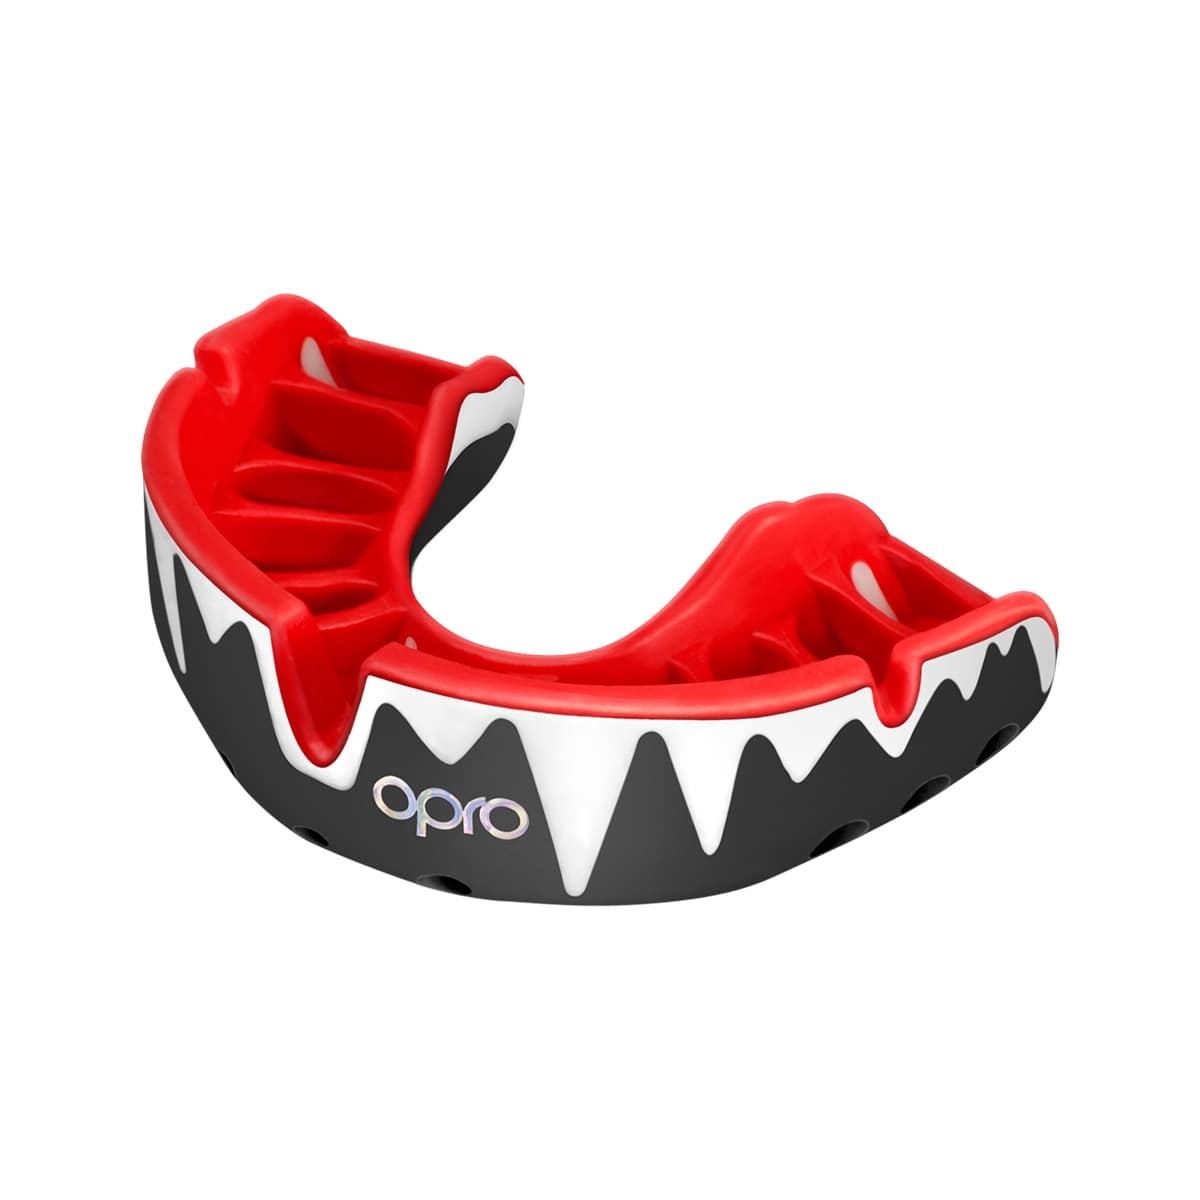 Men's Rugby Protective Mouthguard OPRO Self-Fit Platinum Fangz 2022 Black/White/Red